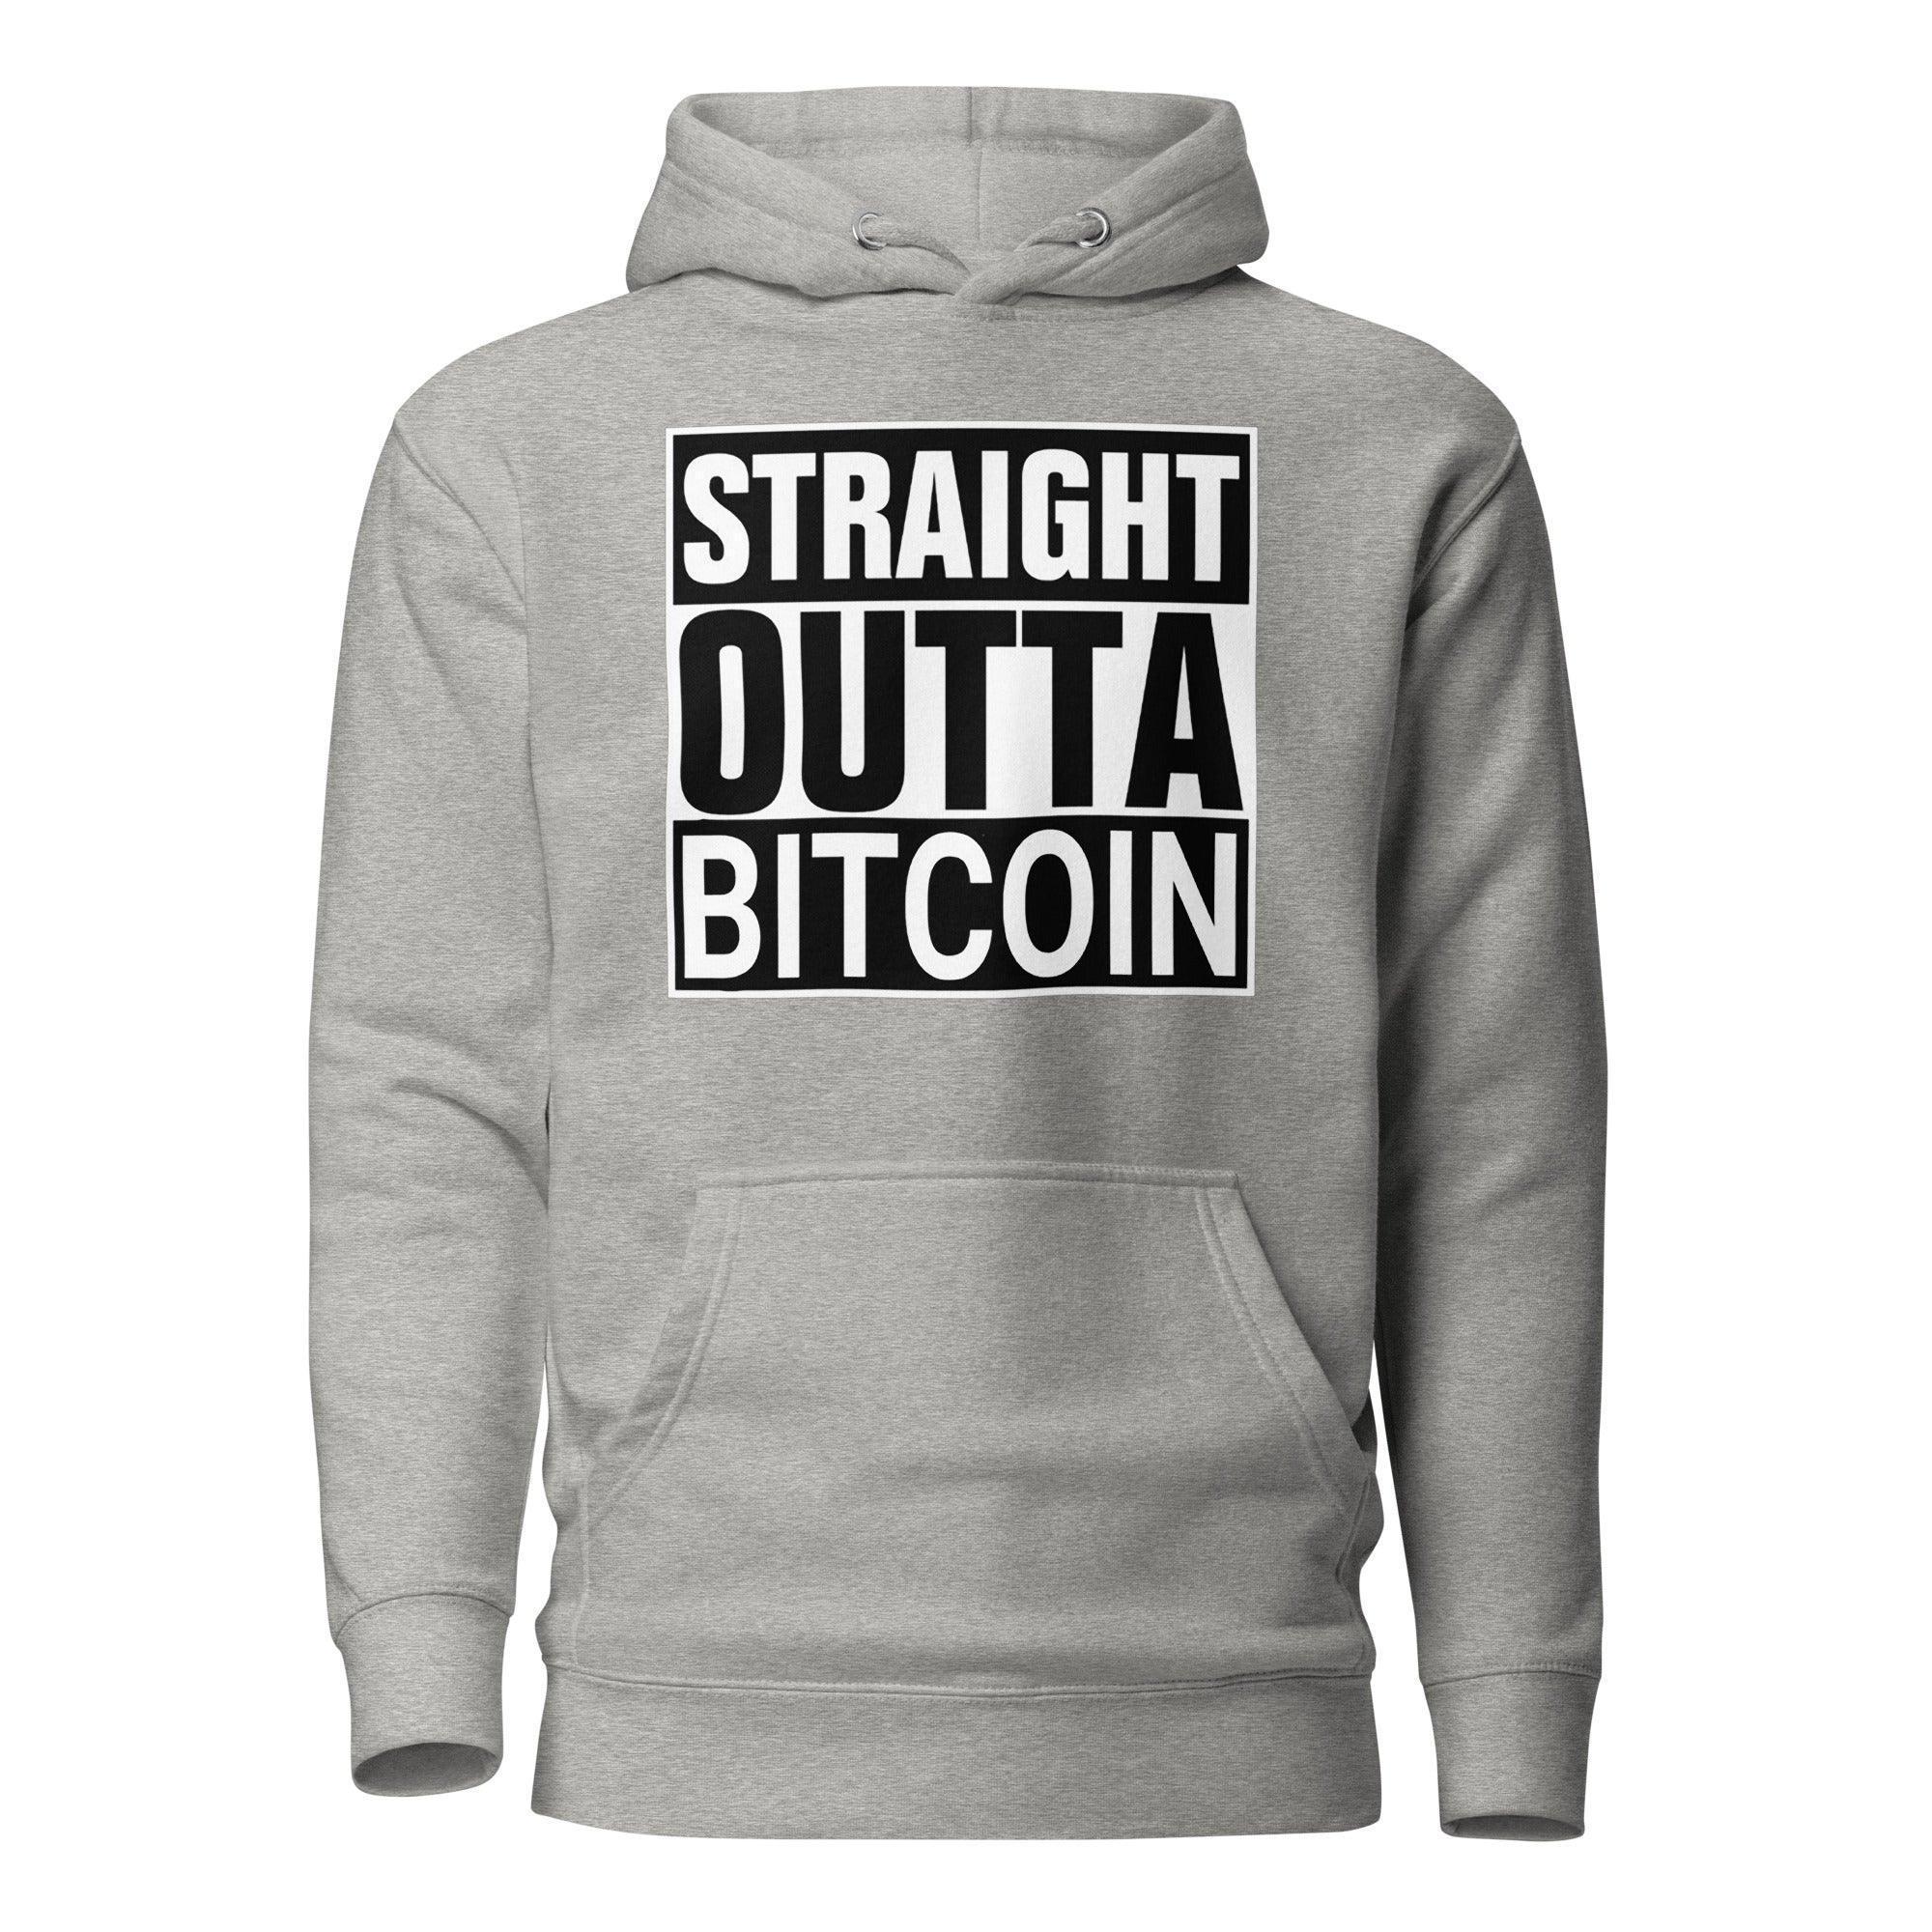 Straight Outta Bitcoin Pullover Hoodie - InvestmenTees